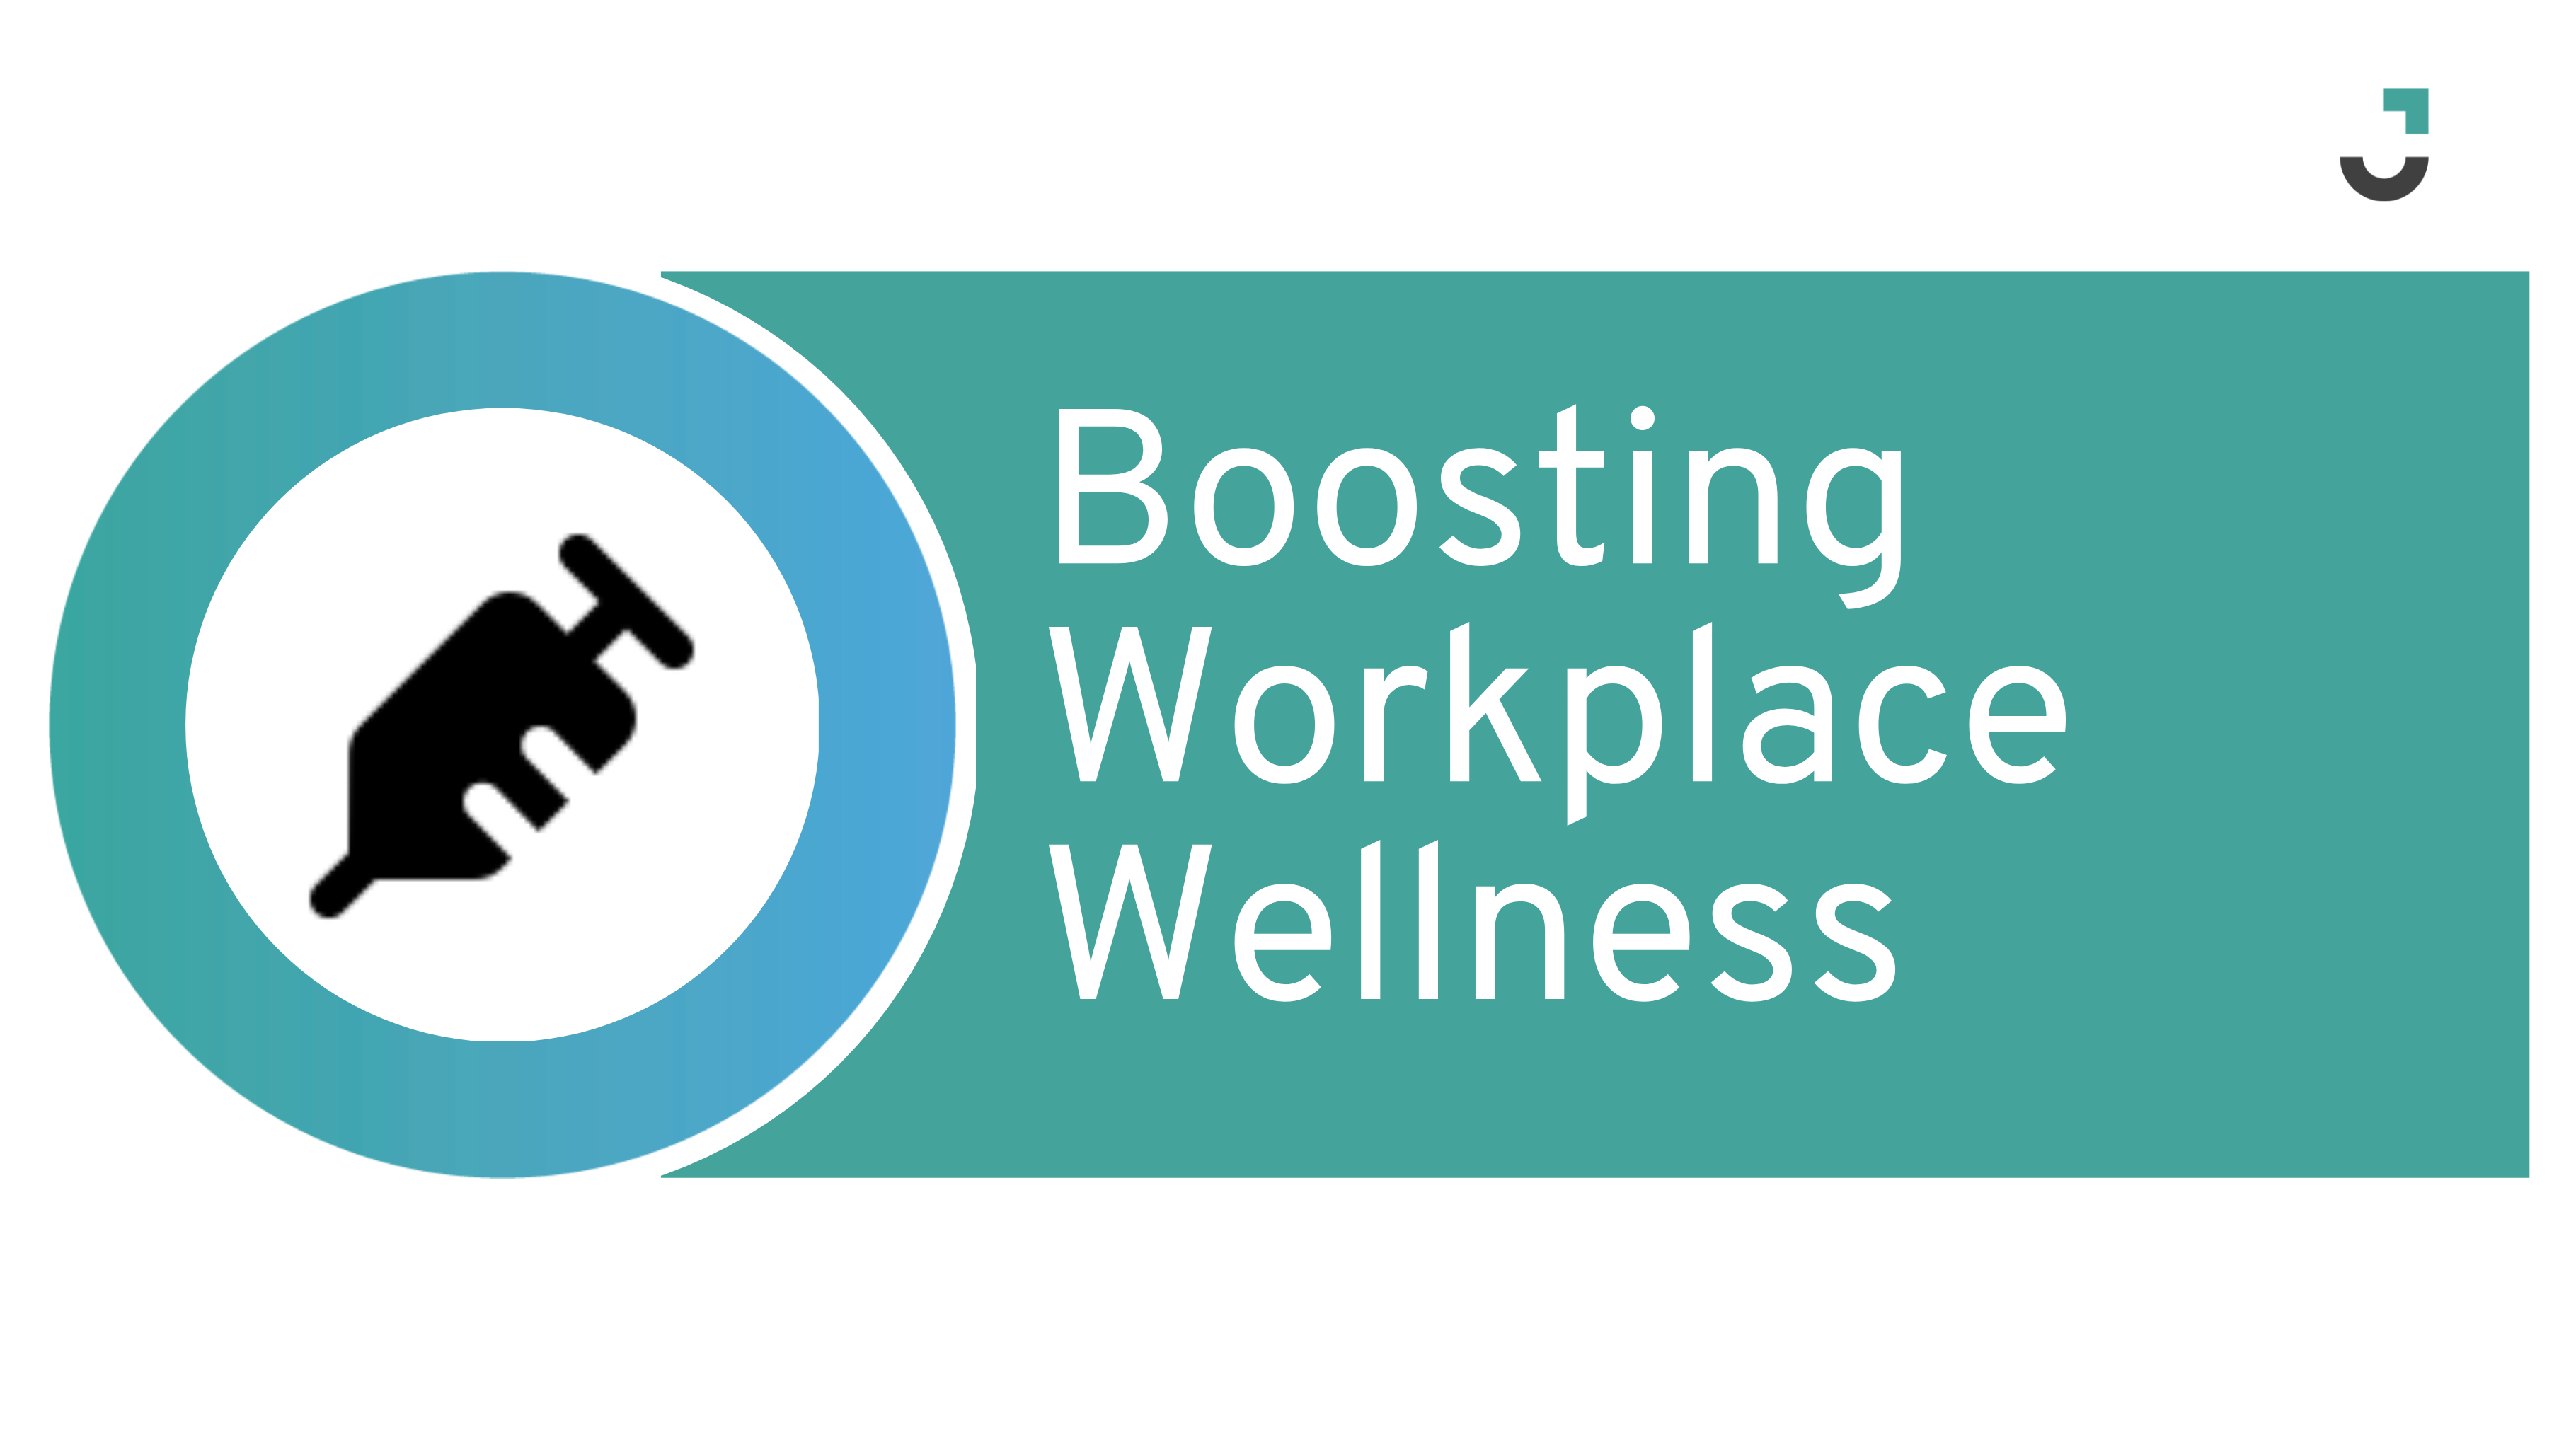 Boosting Workplace Wellness: Benefits of On-site Flu Vaccination Clinics